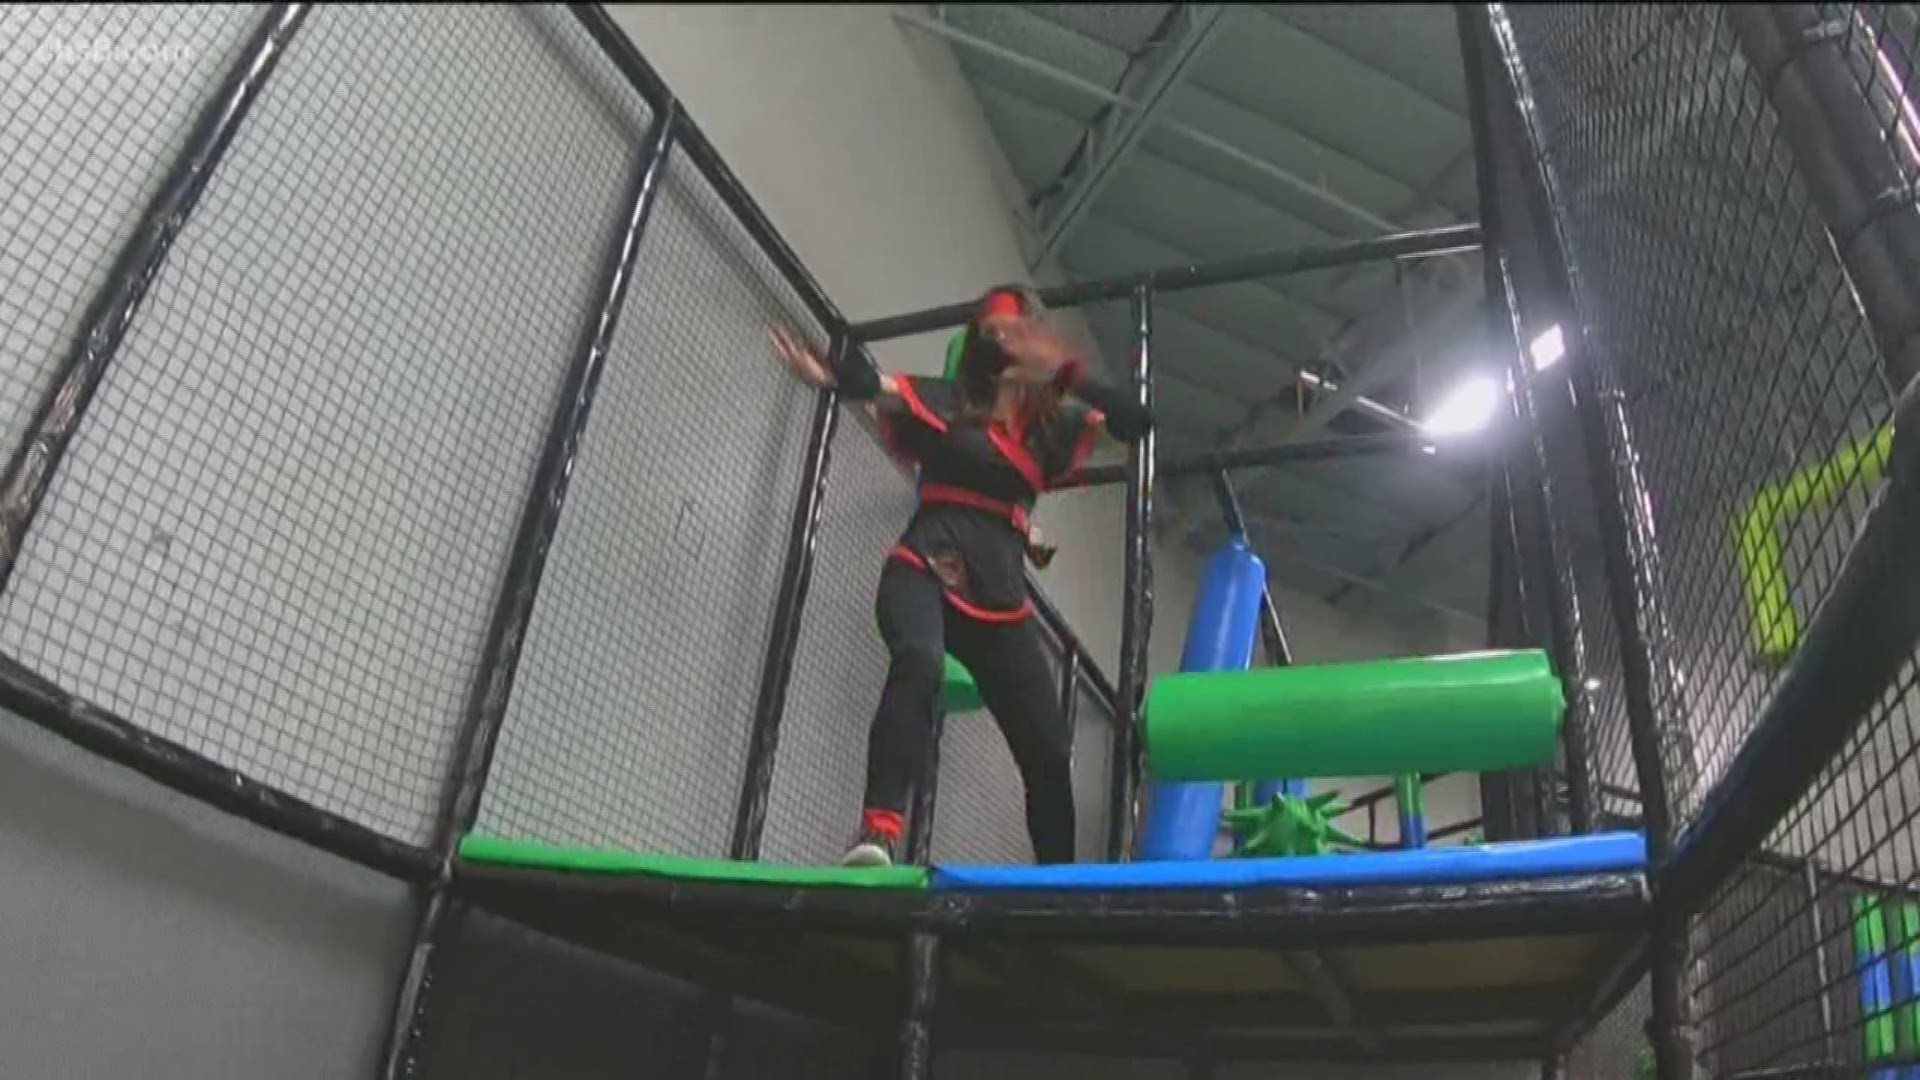 Ninja Factory in Eastlake is located at 871 Showroom Place Suite 106 in Chula Vista. They have a standing obstacle course, warped walls and even a wipeout machine!